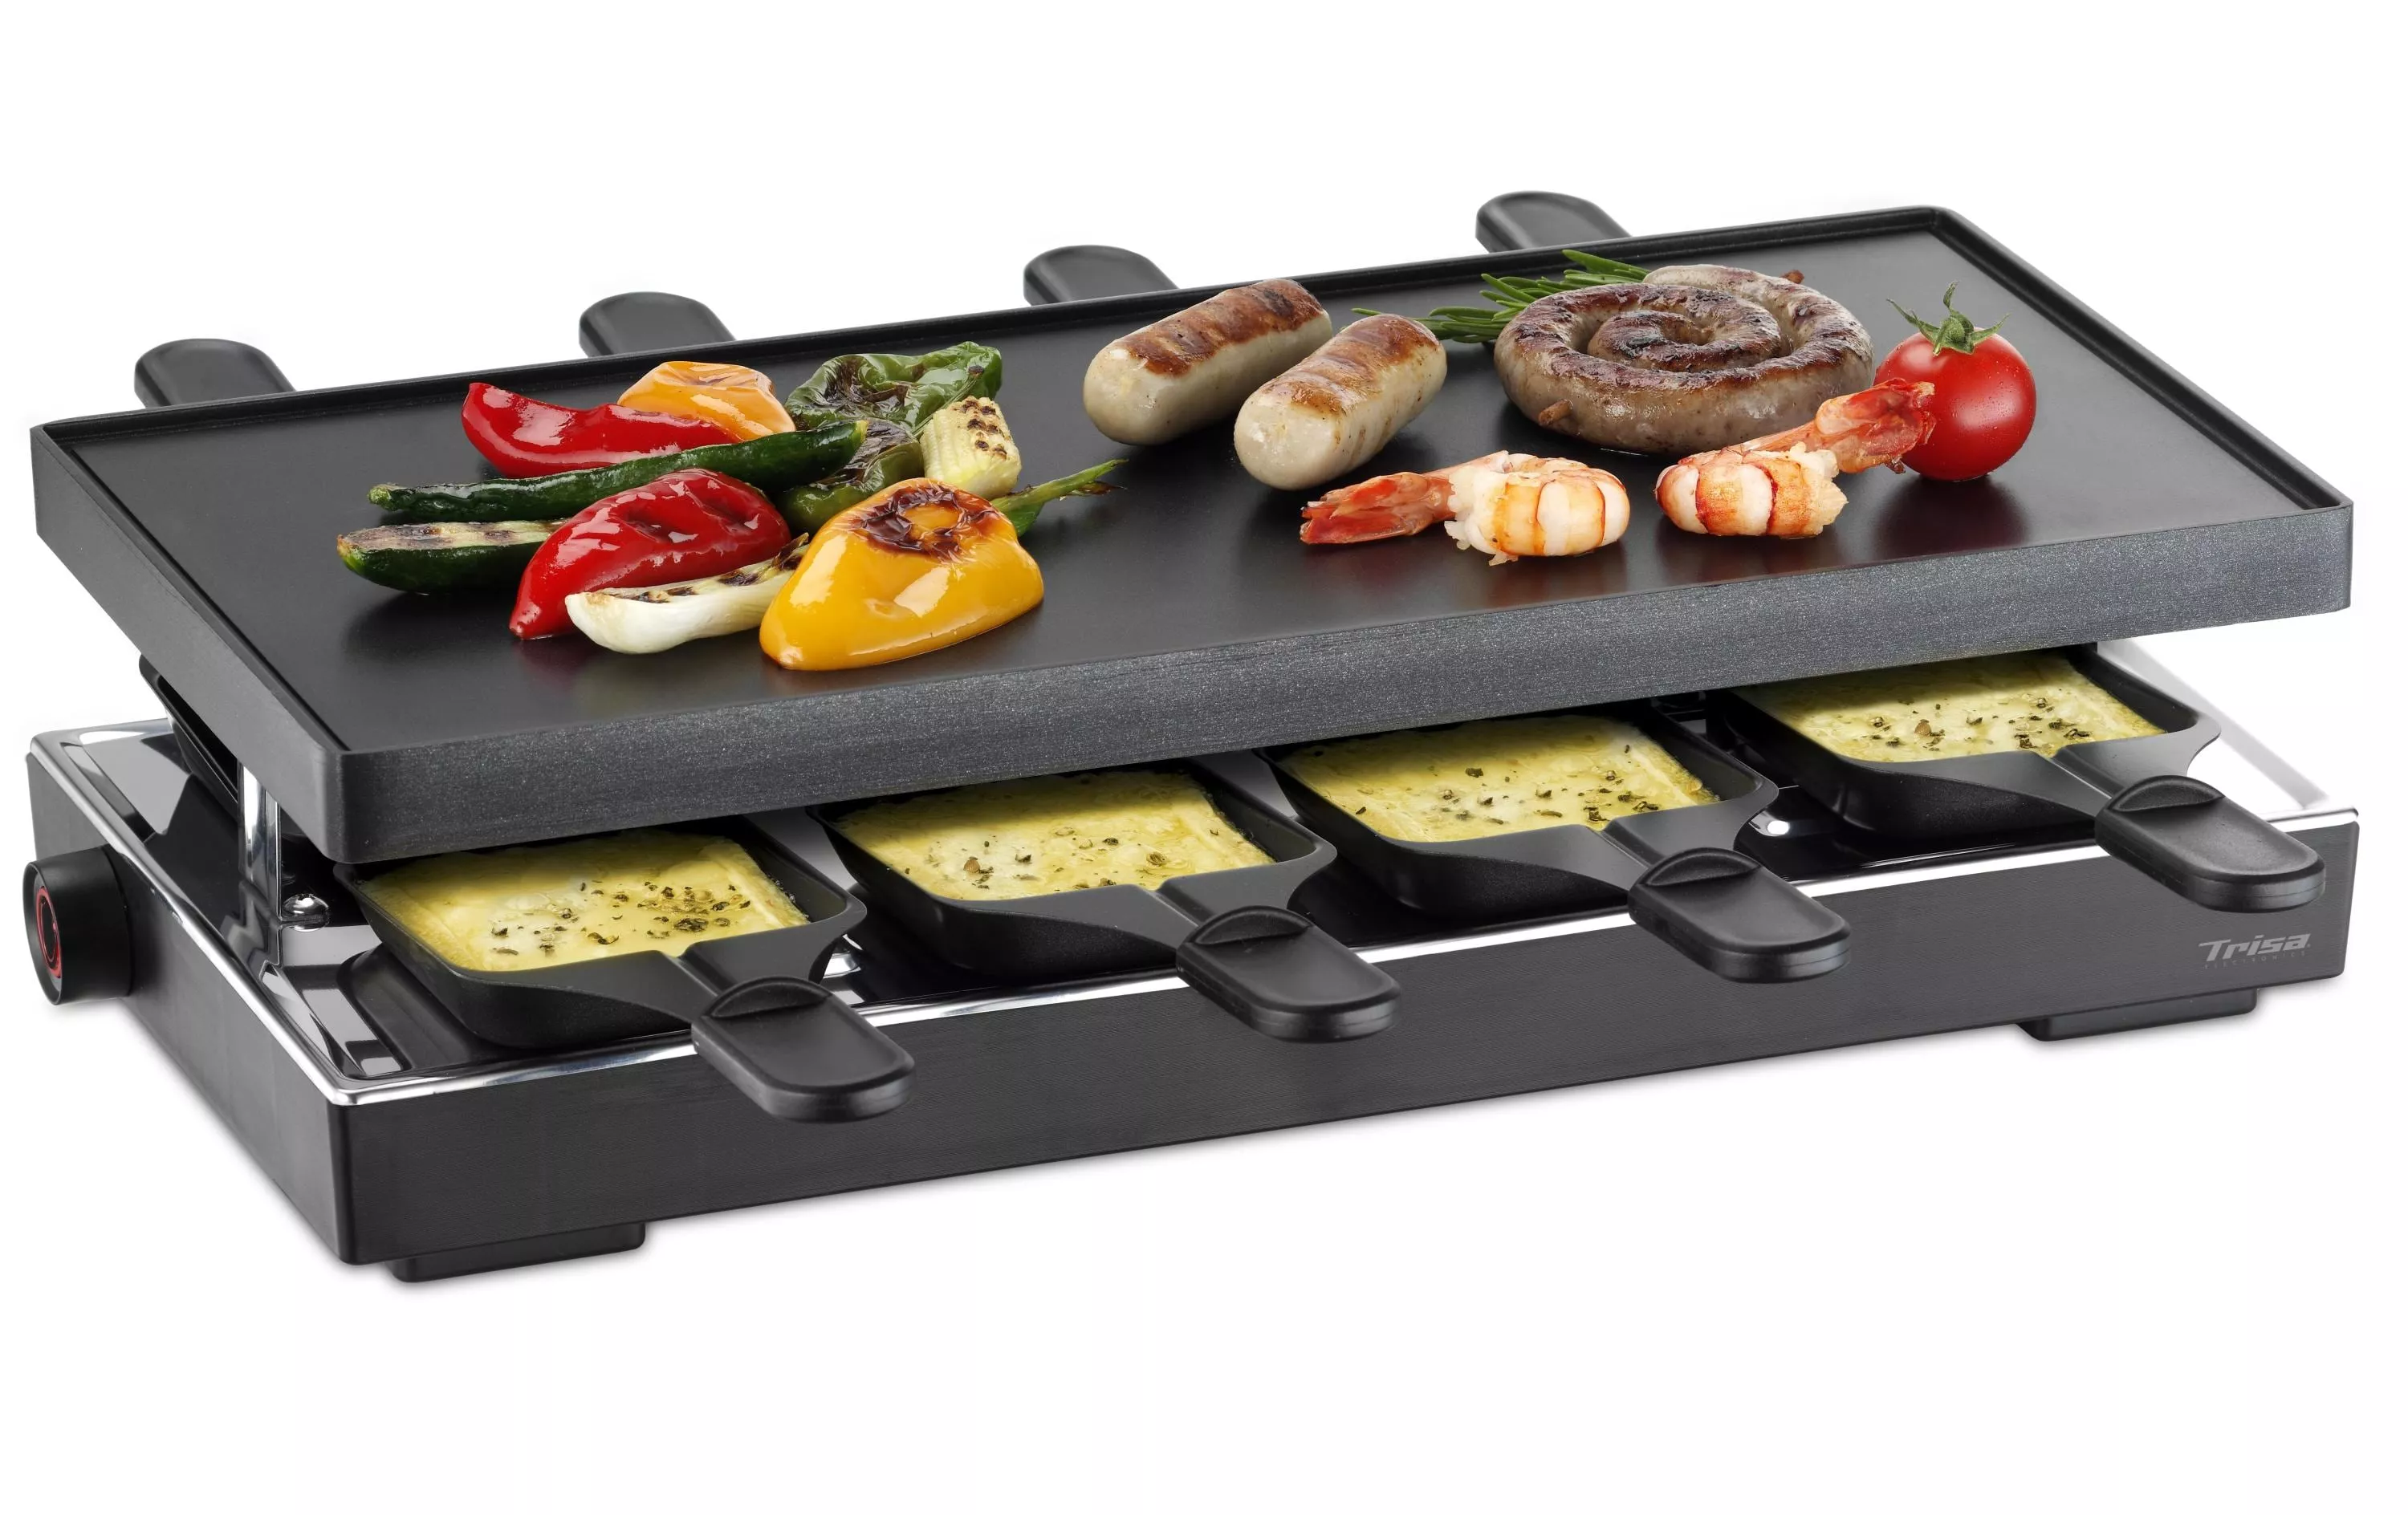 Raclette Oven Style 8 8 persone